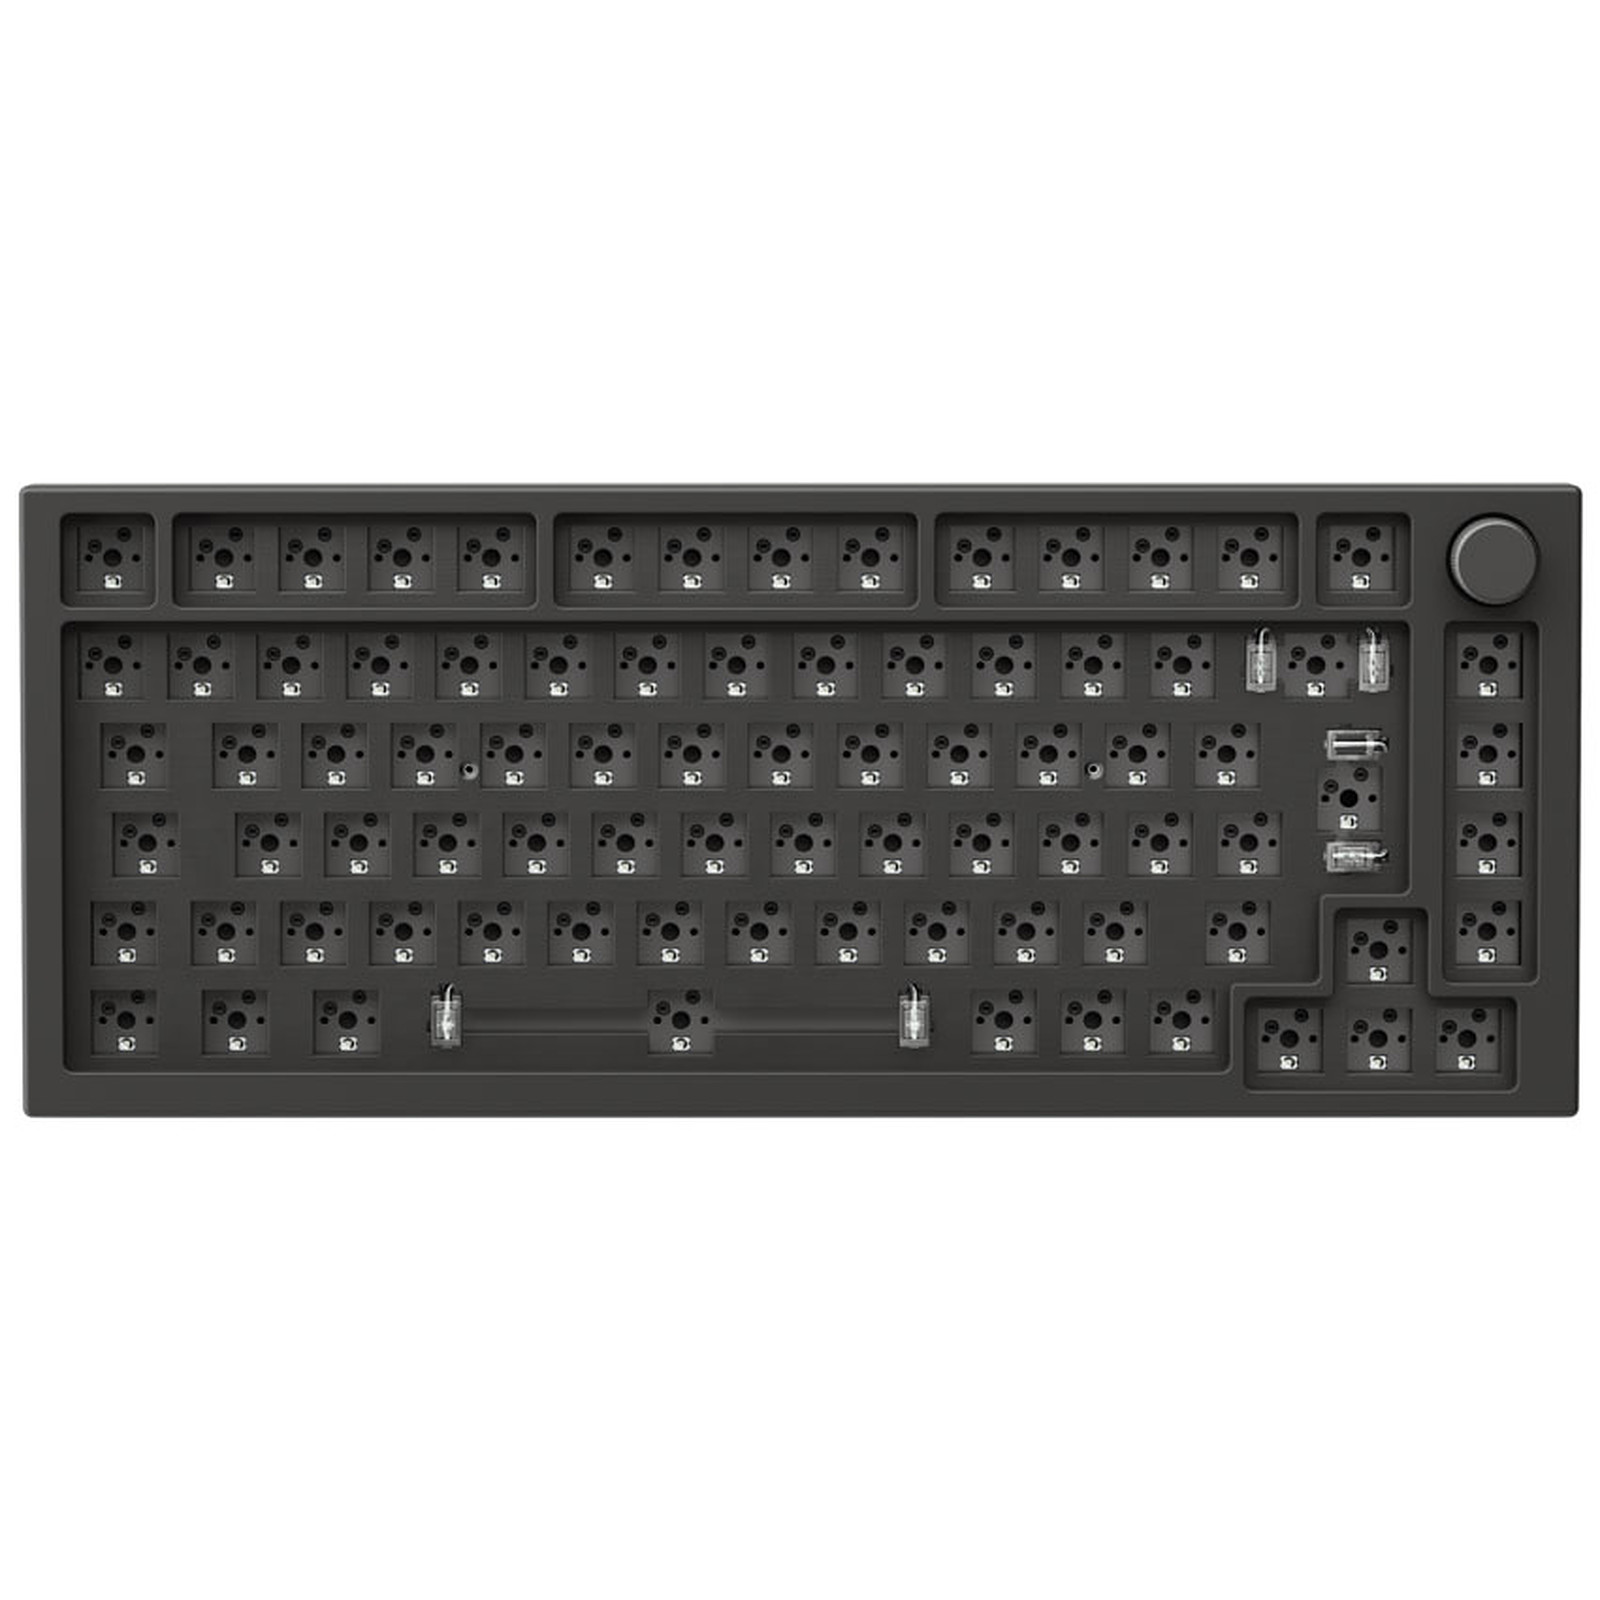 Glorious GMMK Pro ISO (Noir) - Clavier PC Glorious PC Gaming Race